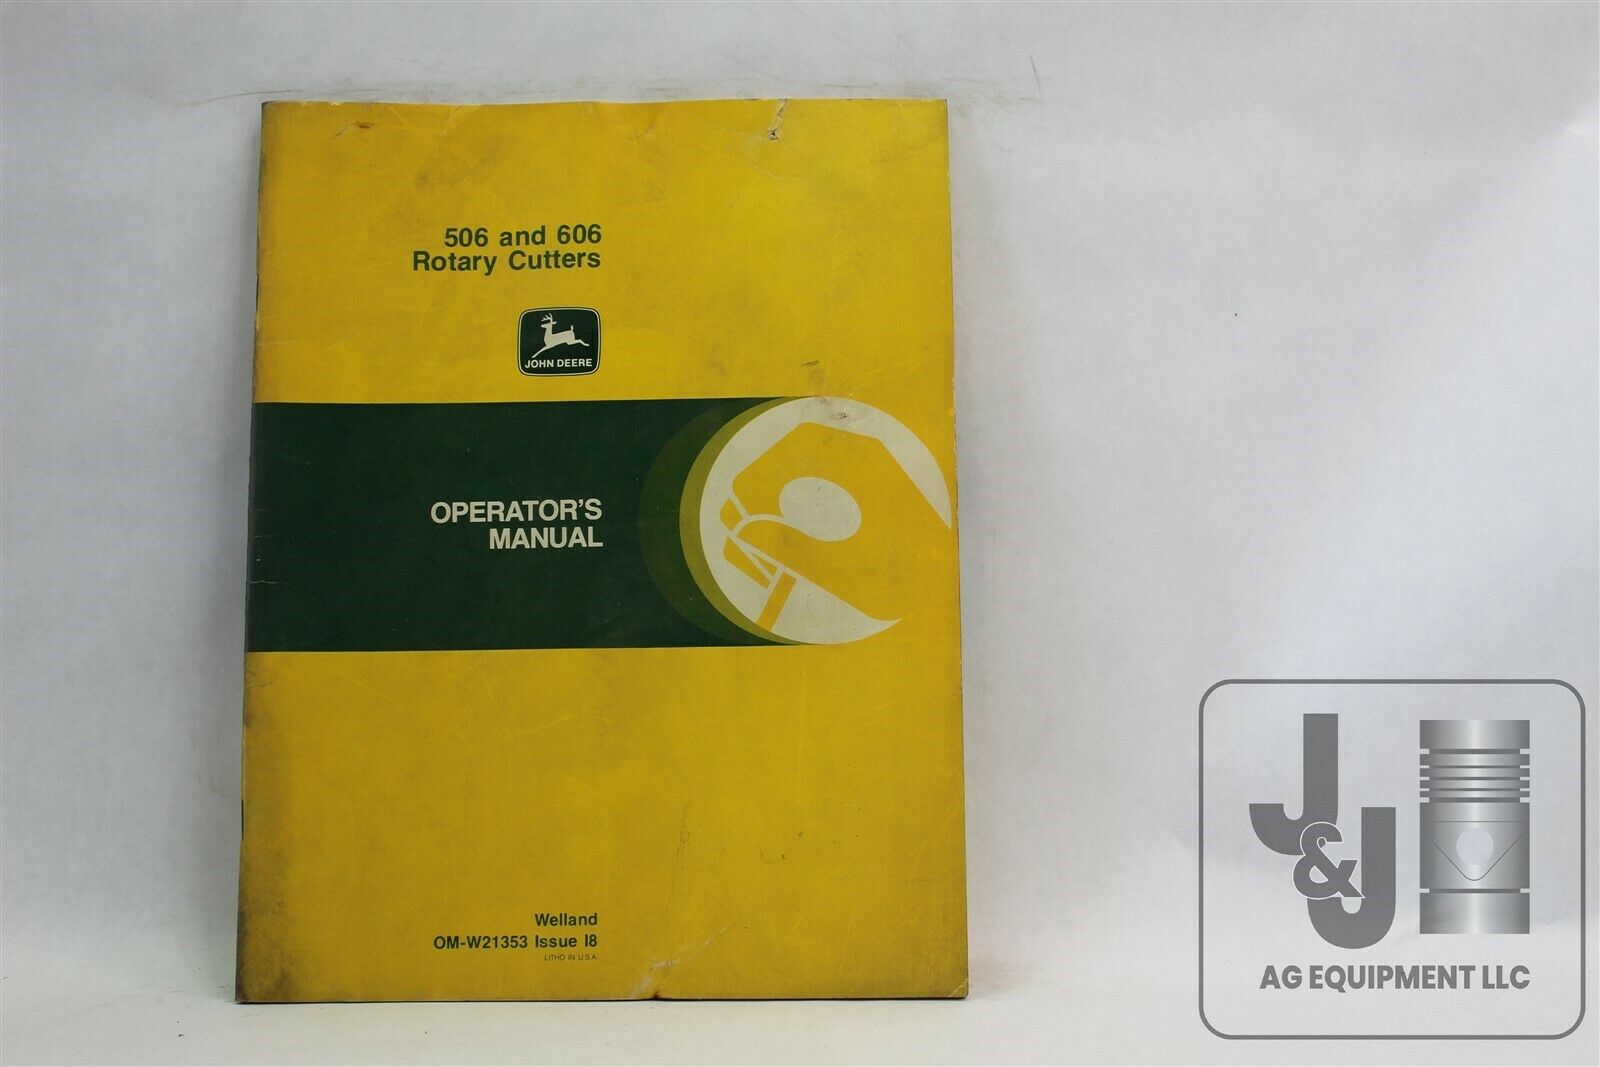 506 AND 606 ROTARY CUTTERS JOHN DEERE OPERATOR'S MANUAL OM-W21353 ISSUE l8